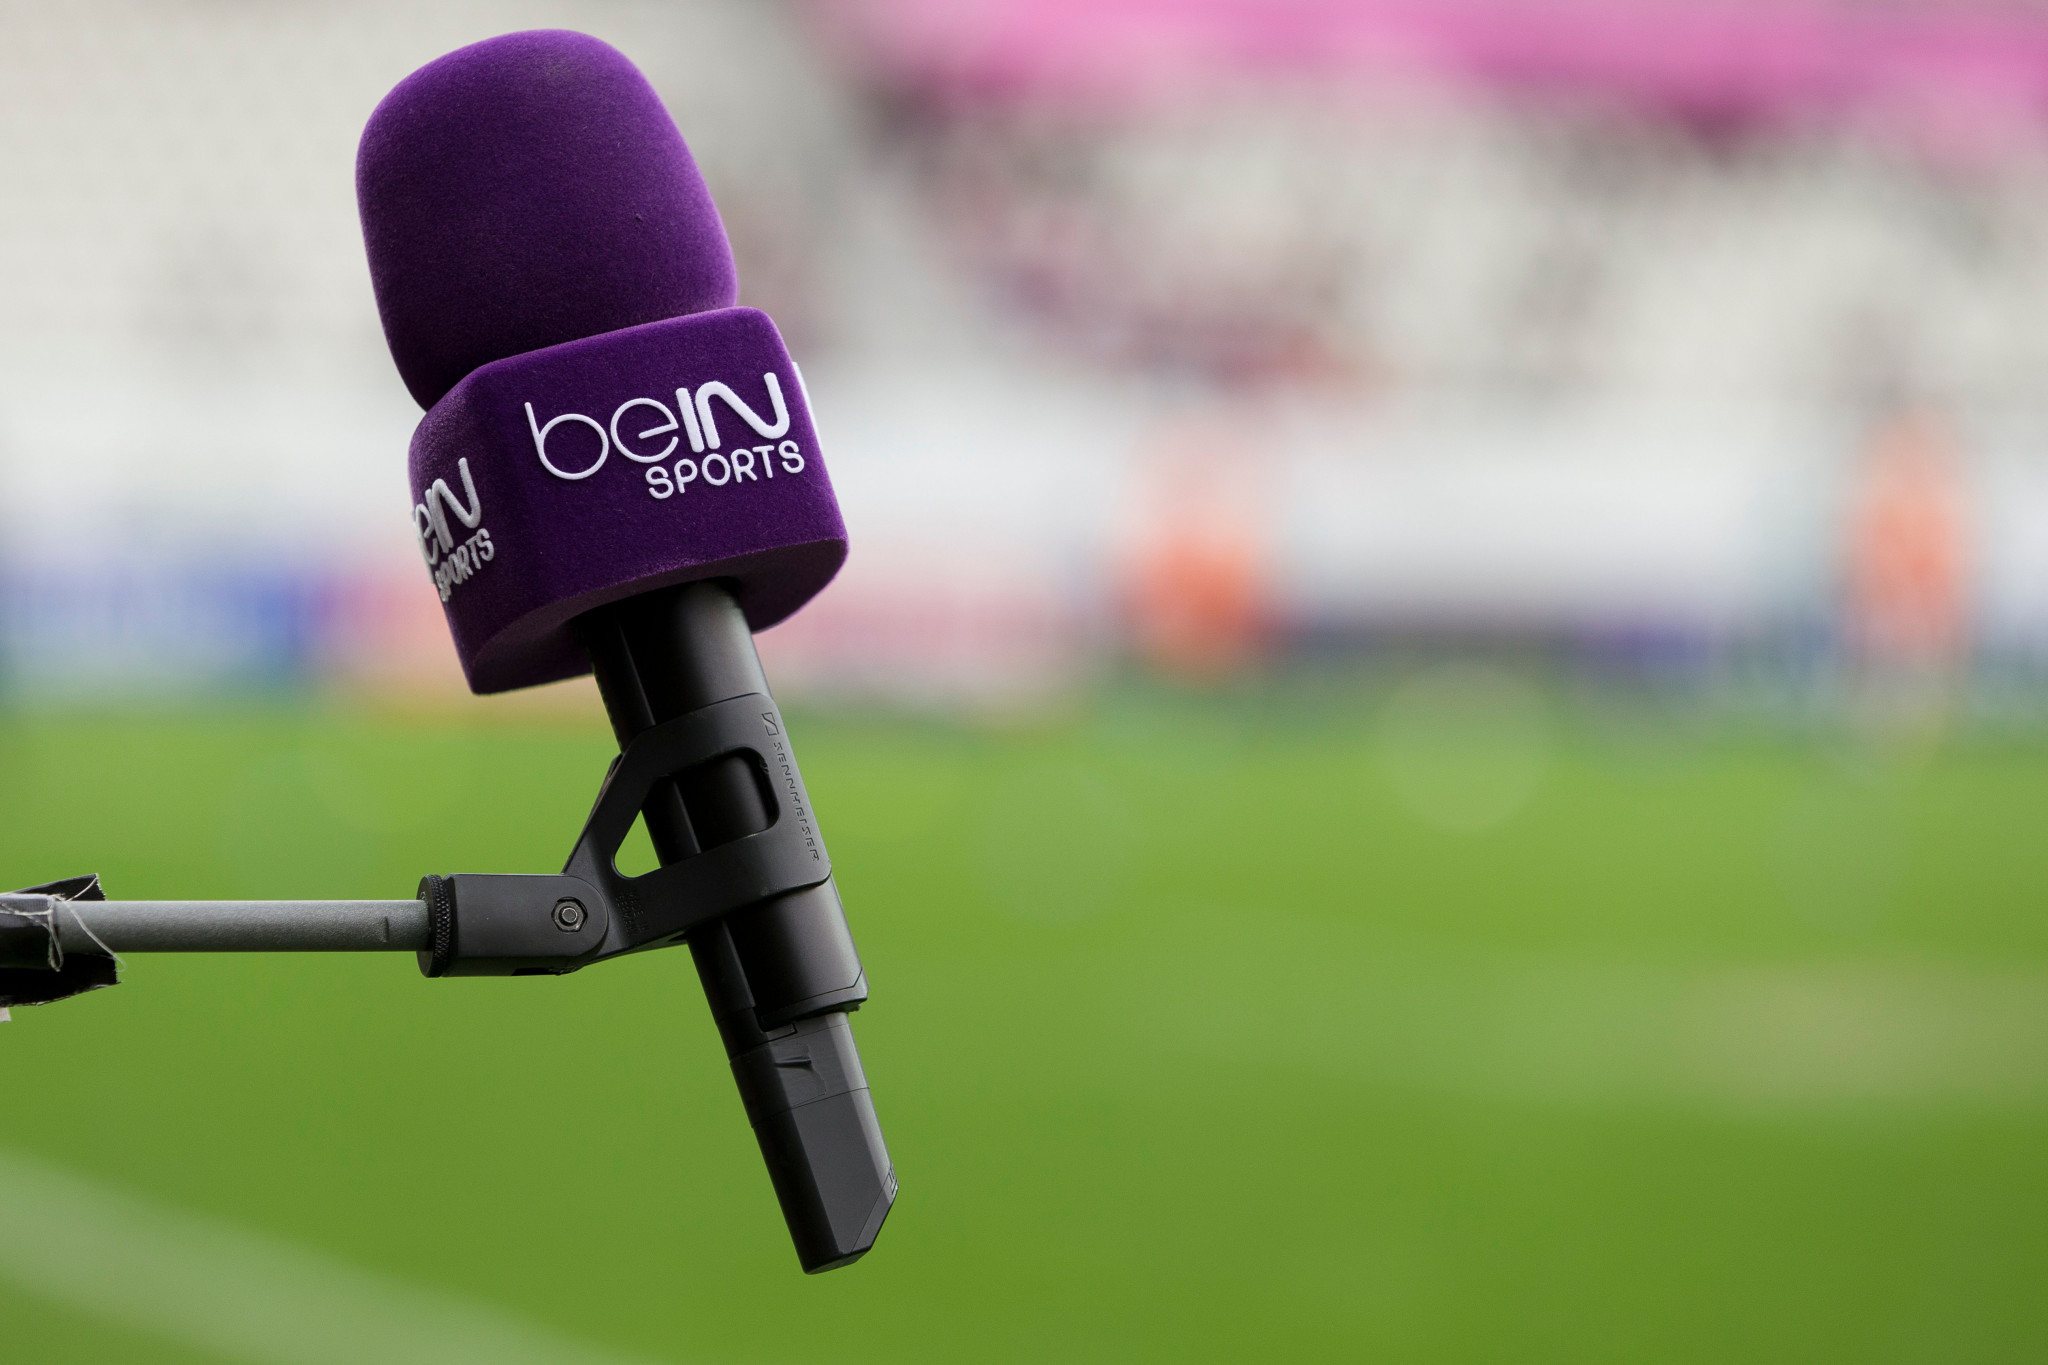 beIN Sports holds the rights to broadcast the Tokyo 2020 Olympics in Saudi Arabia, but is presently banned in the country ©Getty Images